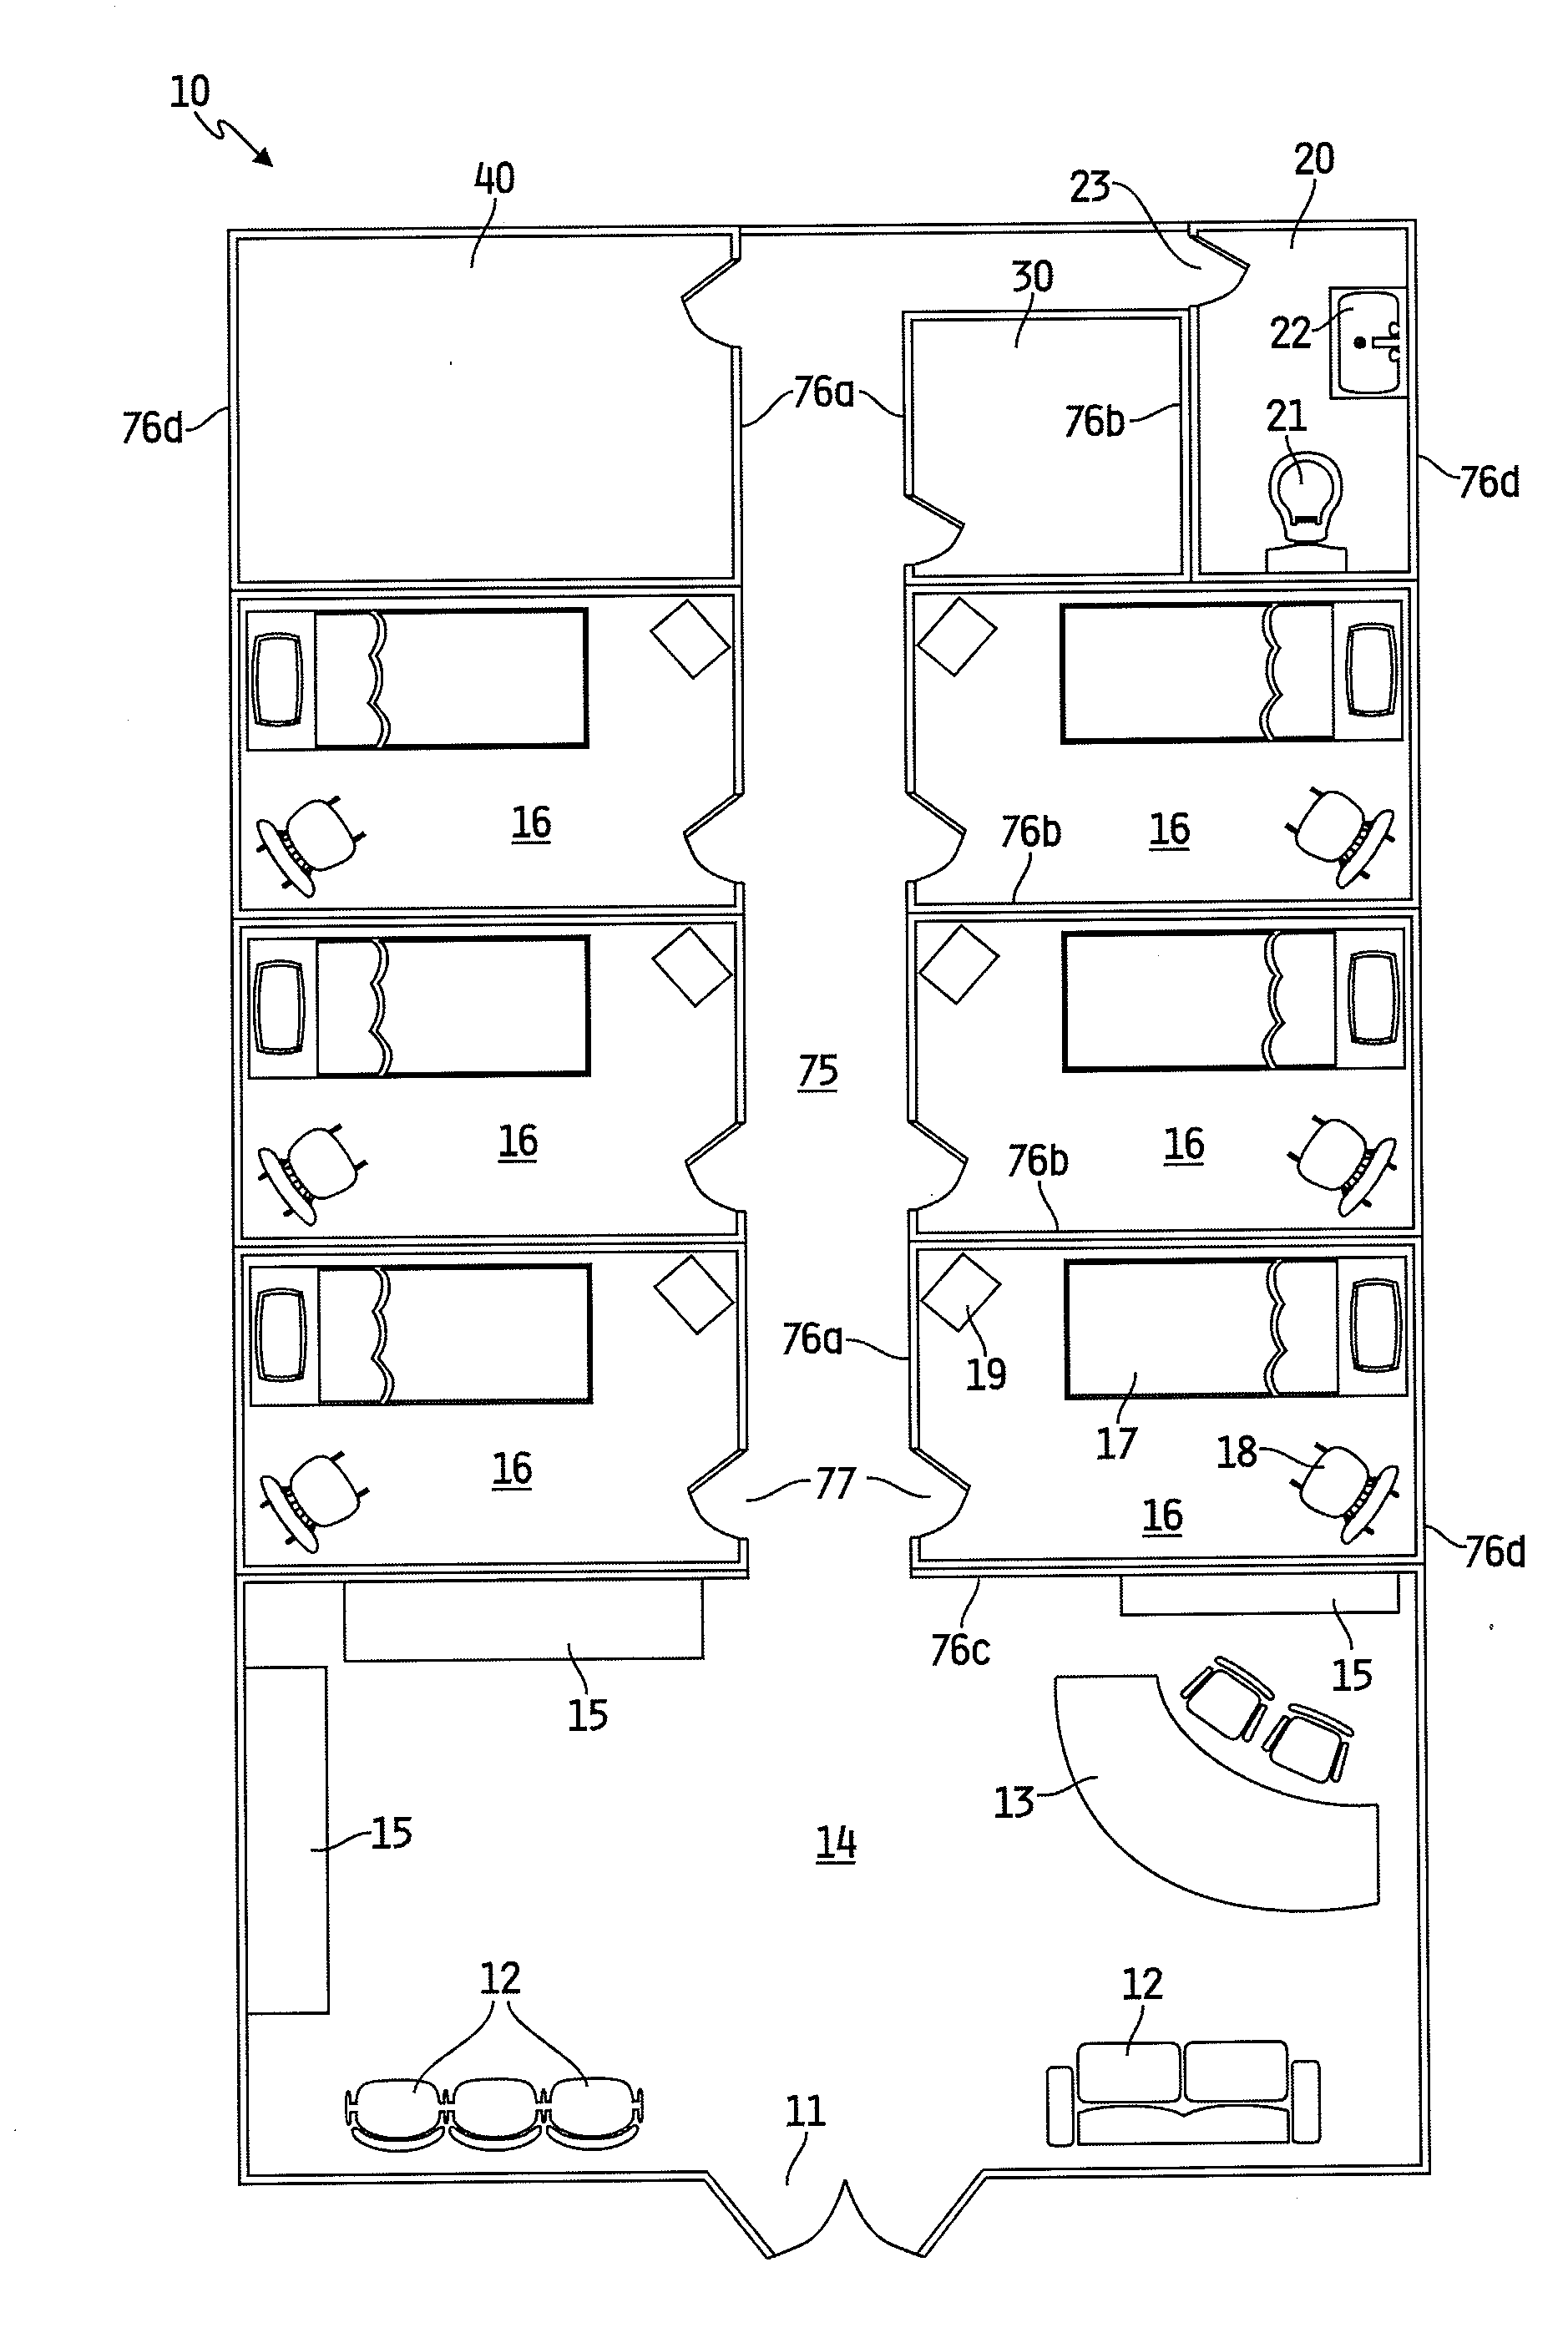 Method and apparatus for providing care